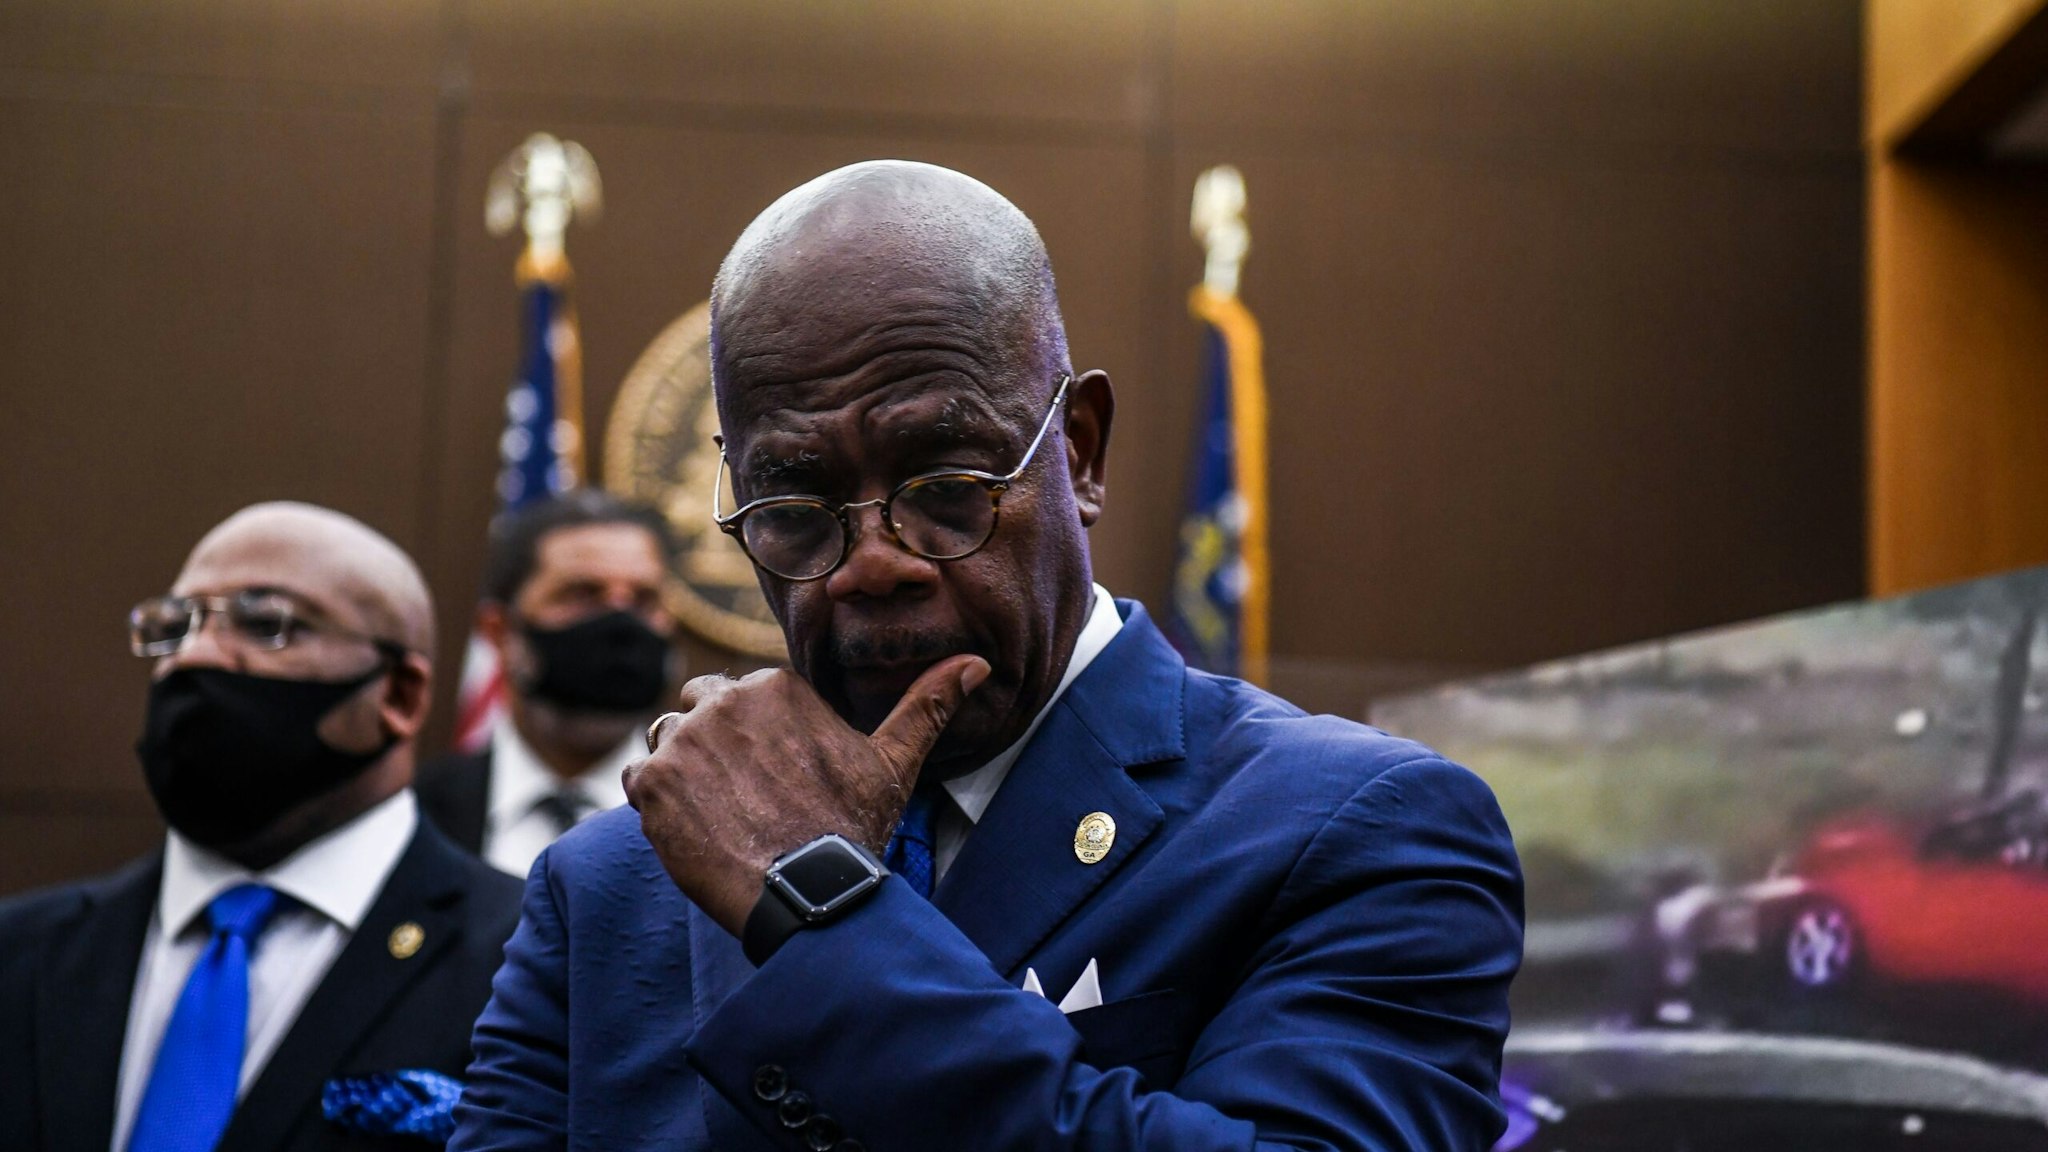 Fulton County District Attorney Paul Howard listens during a pres conference where he announced 11 charges against former Atlanta Police Officer Garrett Rolfe, on June 17, 2020, in Atlanta, Georgia. - Rolfe will be charged with murder for shooting Rayshard Brook, 27, in the back, Howard, announced, in the latest case to spark anger over police killings of African Americans. (Photo by CHANDAN KHANNA / AFP) (Photo by CHANDAN KHANNA/AFP via Getty Images)